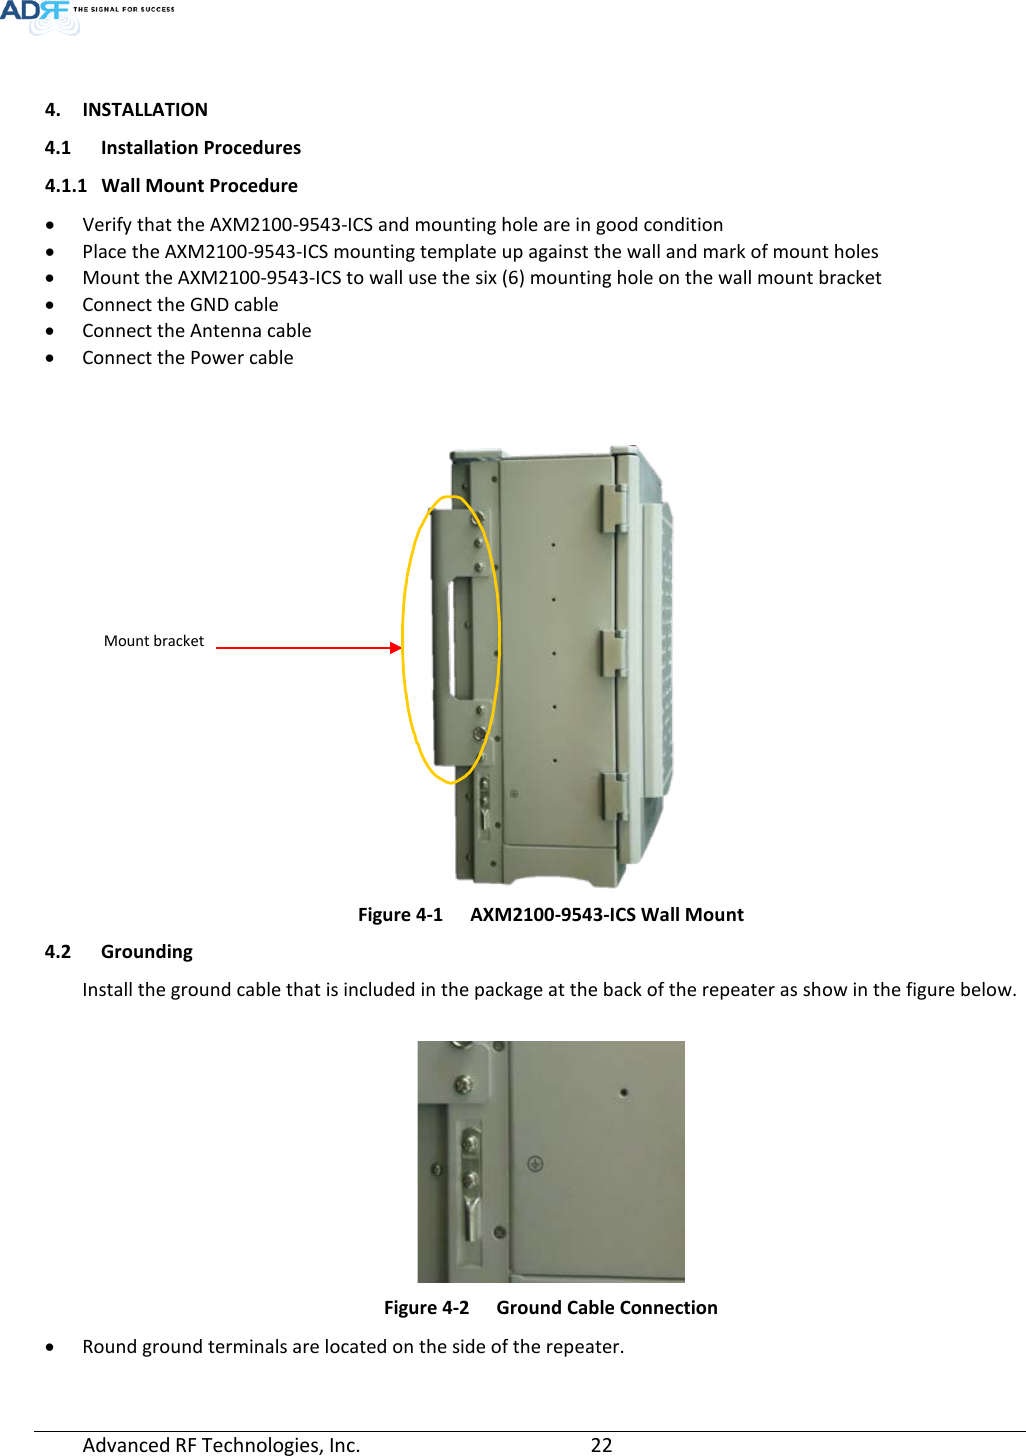   4. INSTALLATION 4.1 Installation Procedures 4.1.1 Wall Mount Procedure • Verify that the AXM2100-9543-ICS and mounting hole are in good condition • Place the AXM2100-9543-ICS mounting template up against the wall and mark of mount holes • Mount the AXM2100-9543-ICS to wall use the six (6) mounting hole on the wall mount bracket • Connect the GND cable • Connect the Antenna cable • Connect the Power cable    Figure 4-1  AXM2100-9543-ICS Wall Mount 4.2 Grounding Install the ground cable that is included in the package at the back of the repeater as show in the figure below.   Figure 4-2  Ground Cable Connection • Round ground terminals are located on the side of the repeater.  Mount bracket Advanced RF Technologies, Inc.       22    